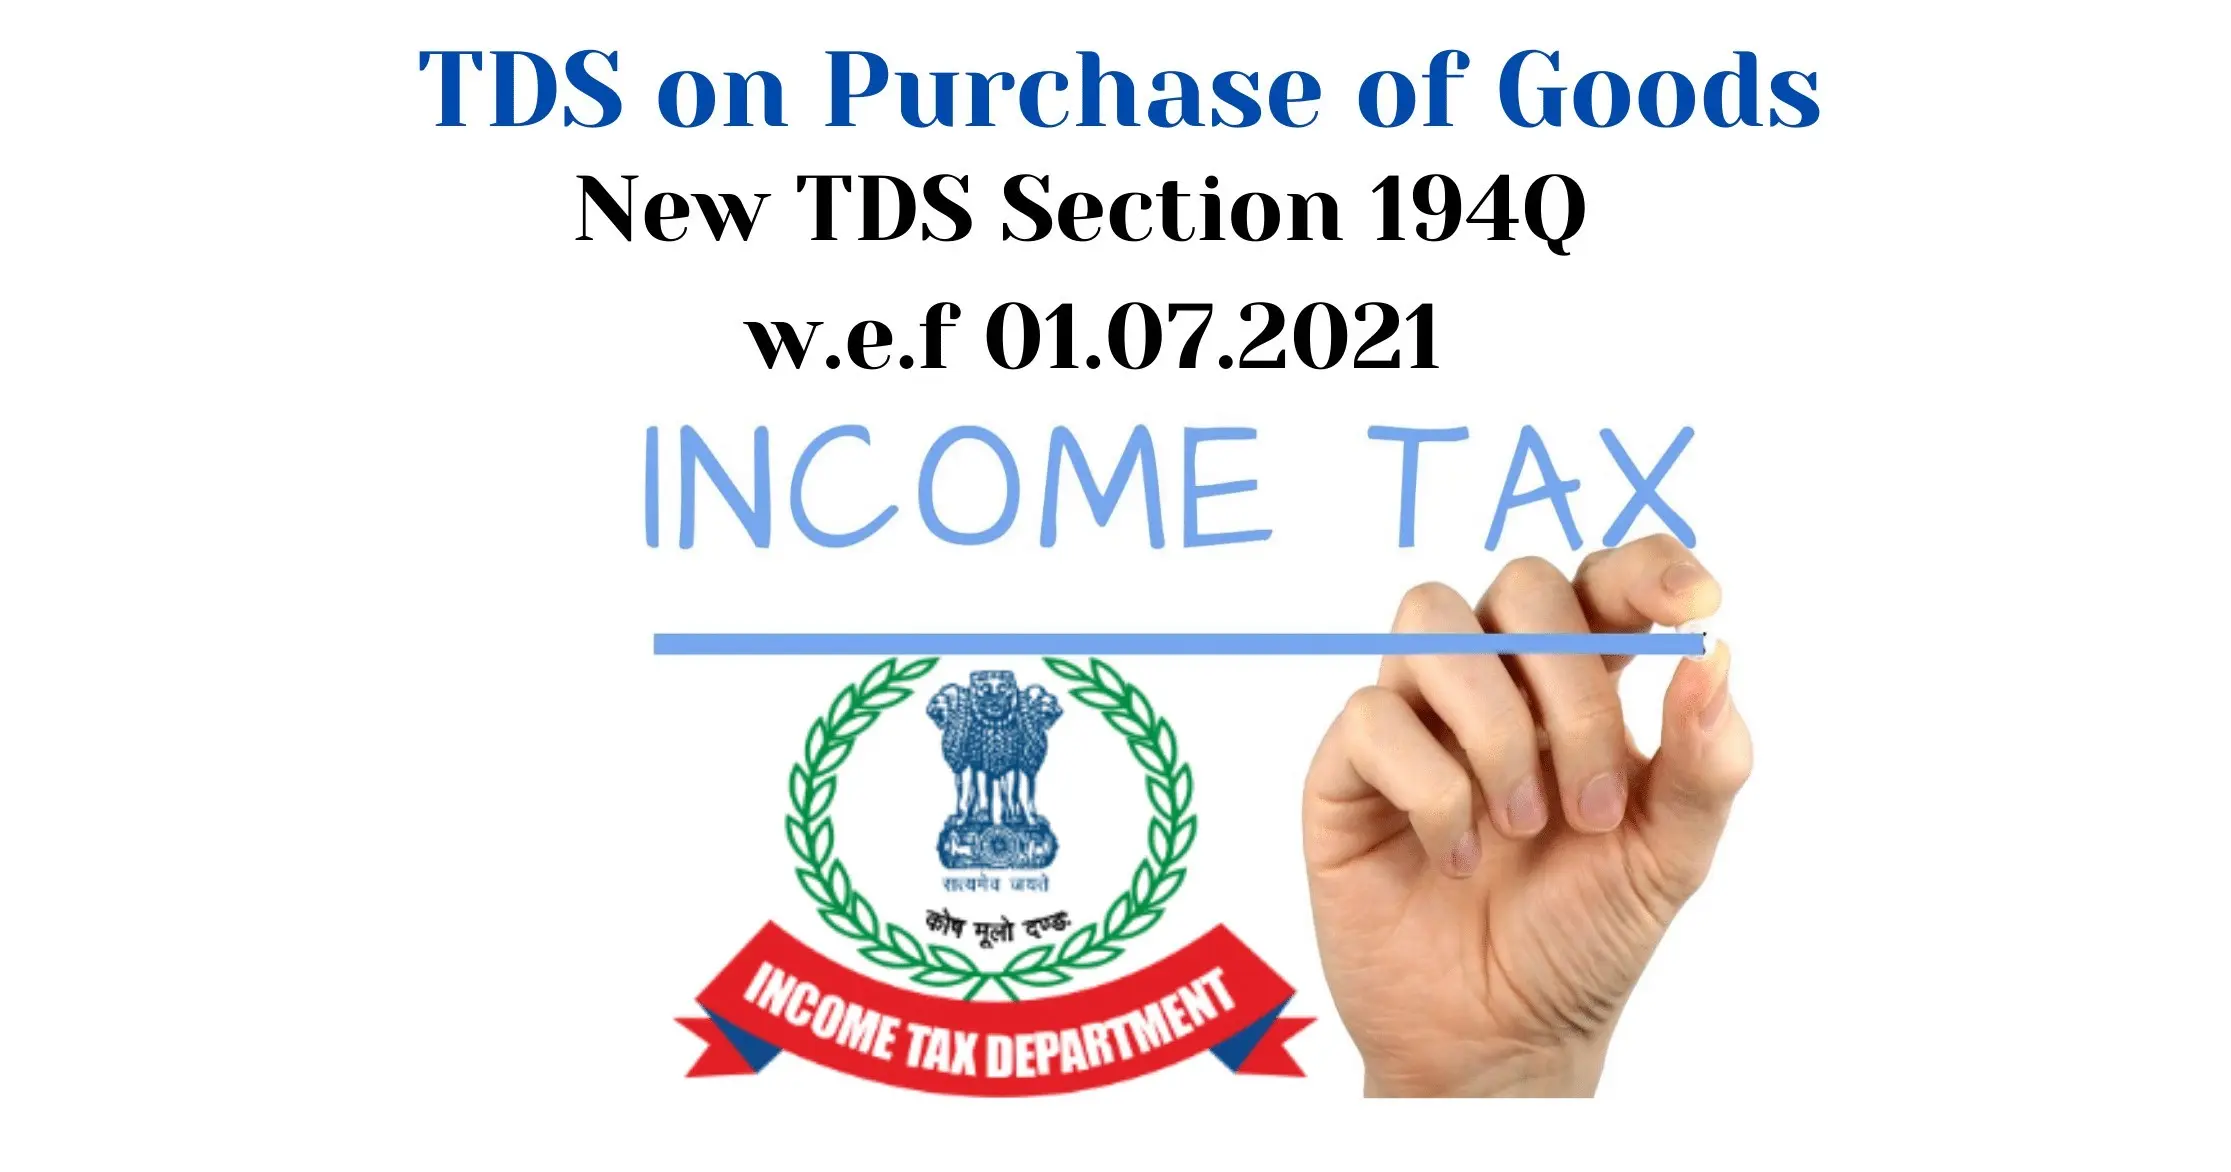 SECTIONS 194Q vis-a-vis 206C(IH) OF THE INCOME-TAX ACT 1961 W.E.F 01.07.2021-IS IT A CASE OF OVERLAPPING COMPLIANCE